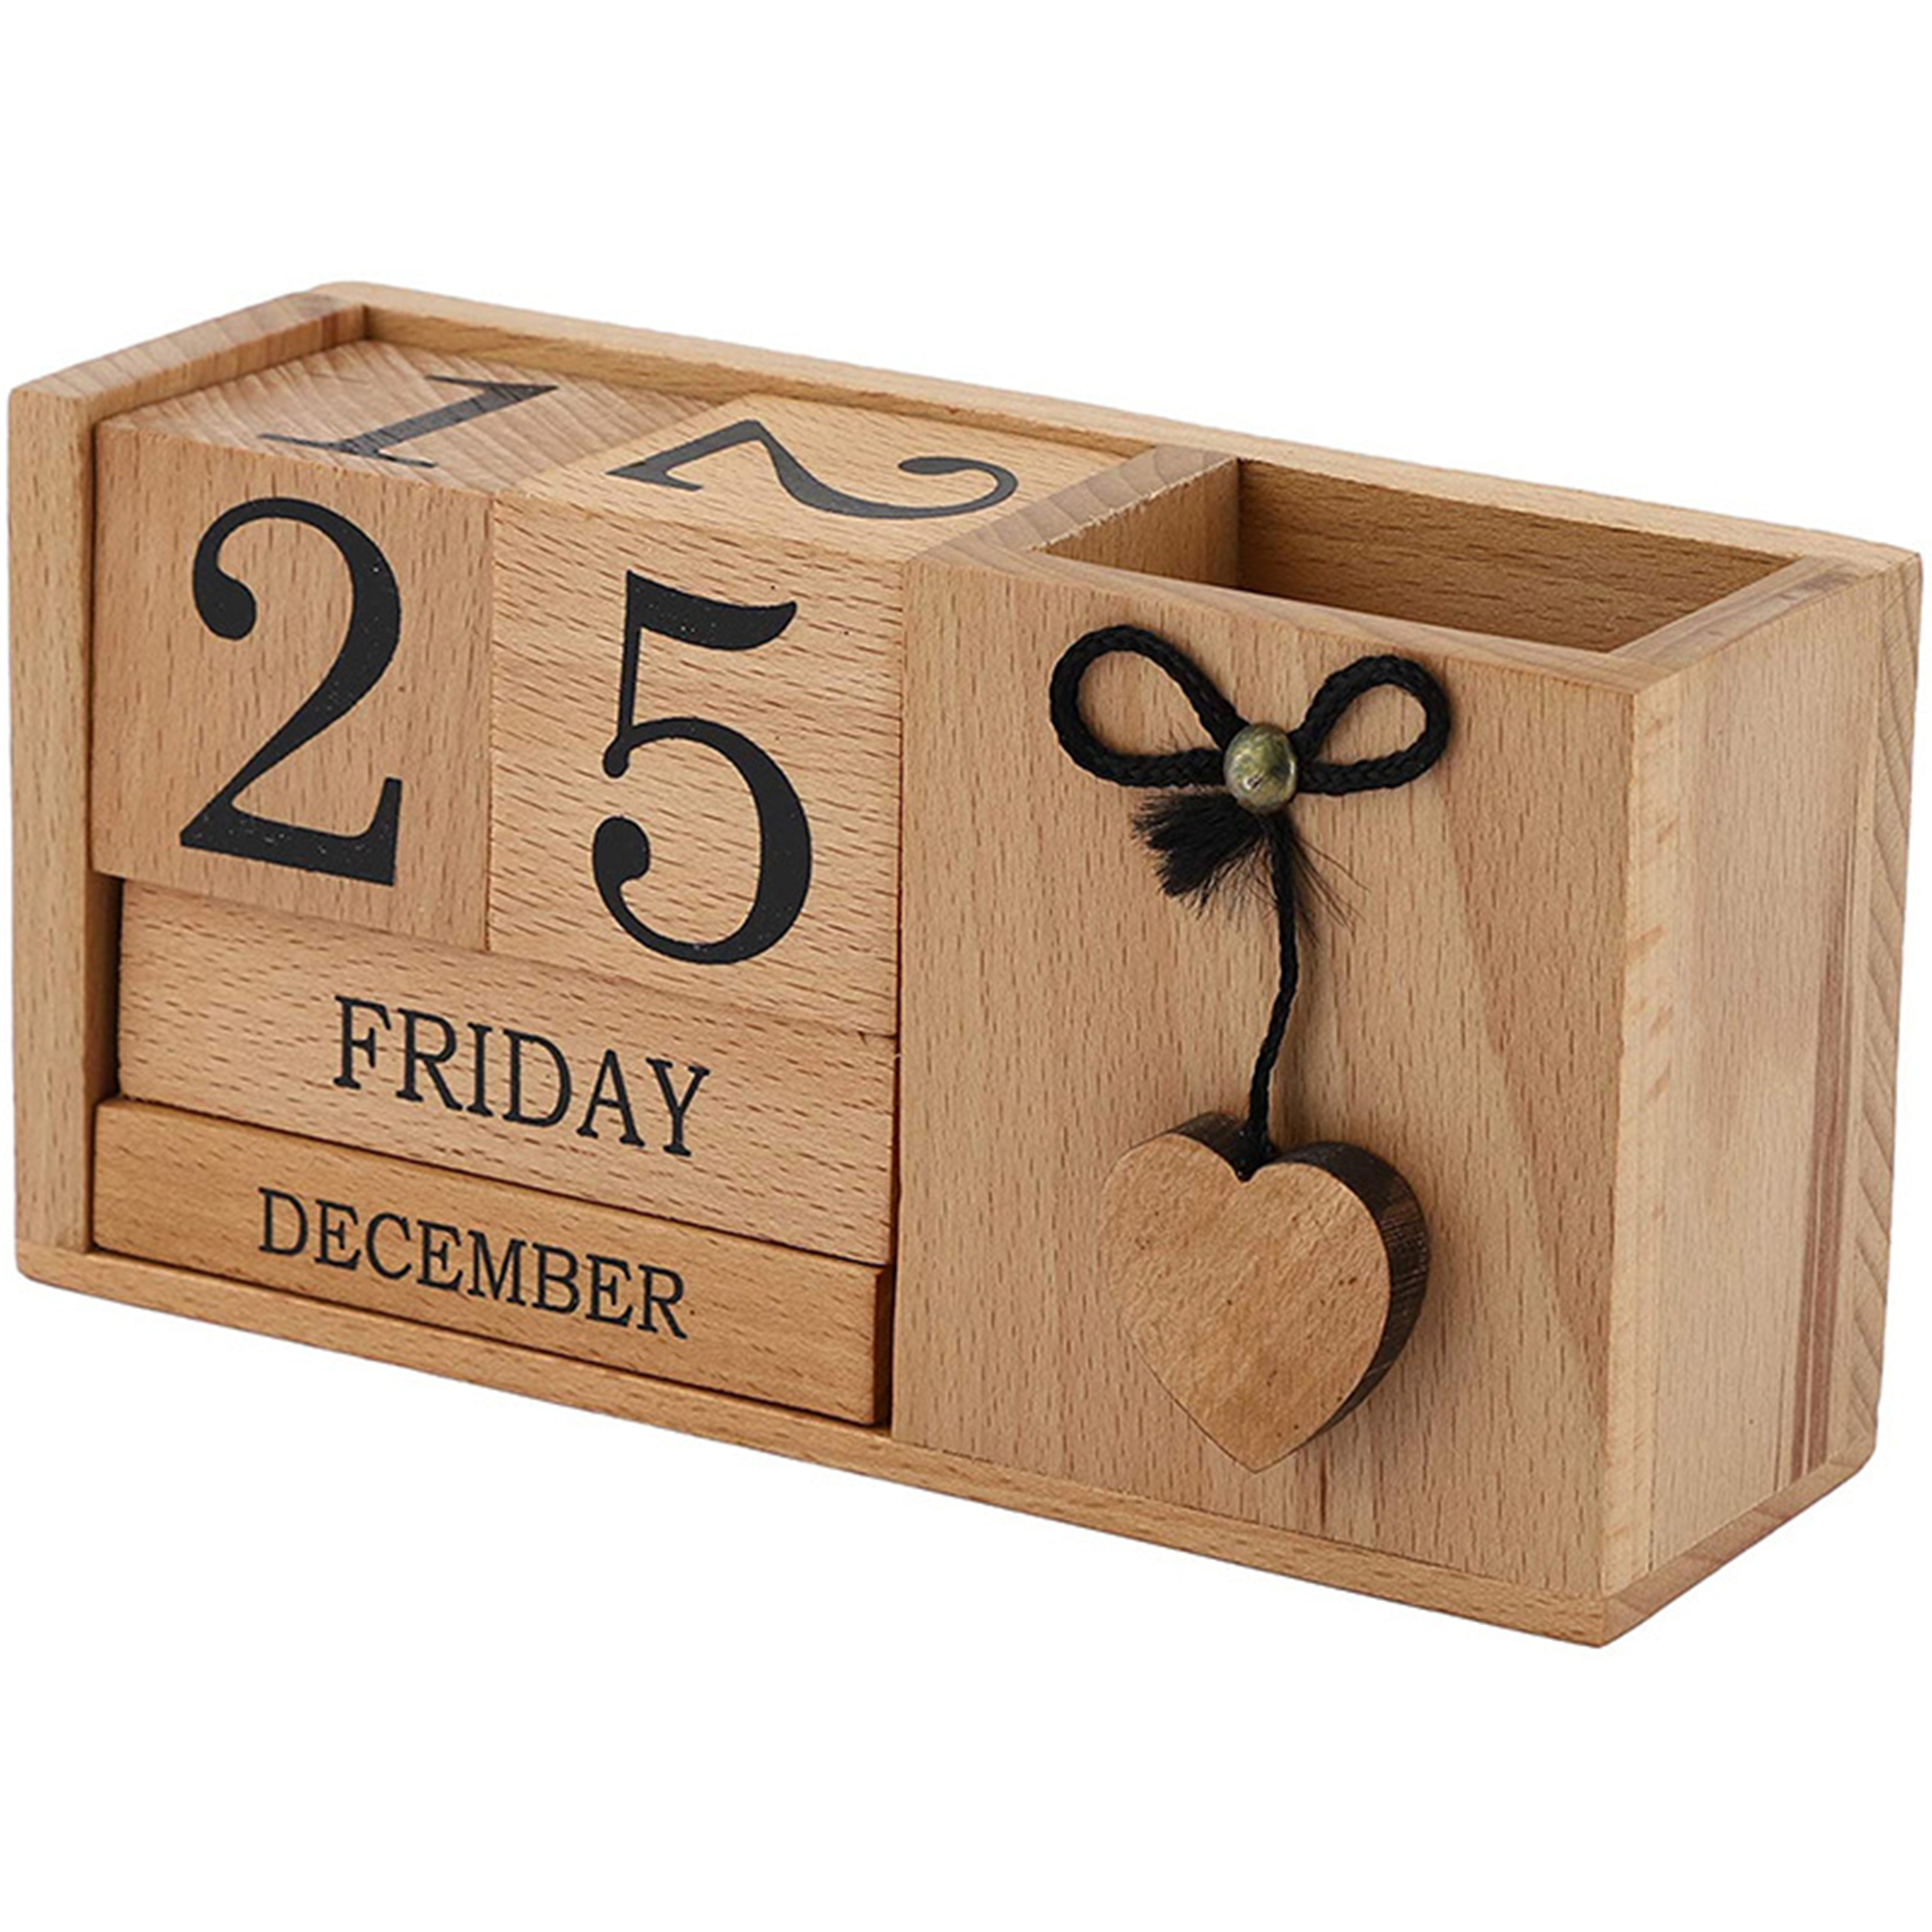 Wooden perpetual calendar for table decoration